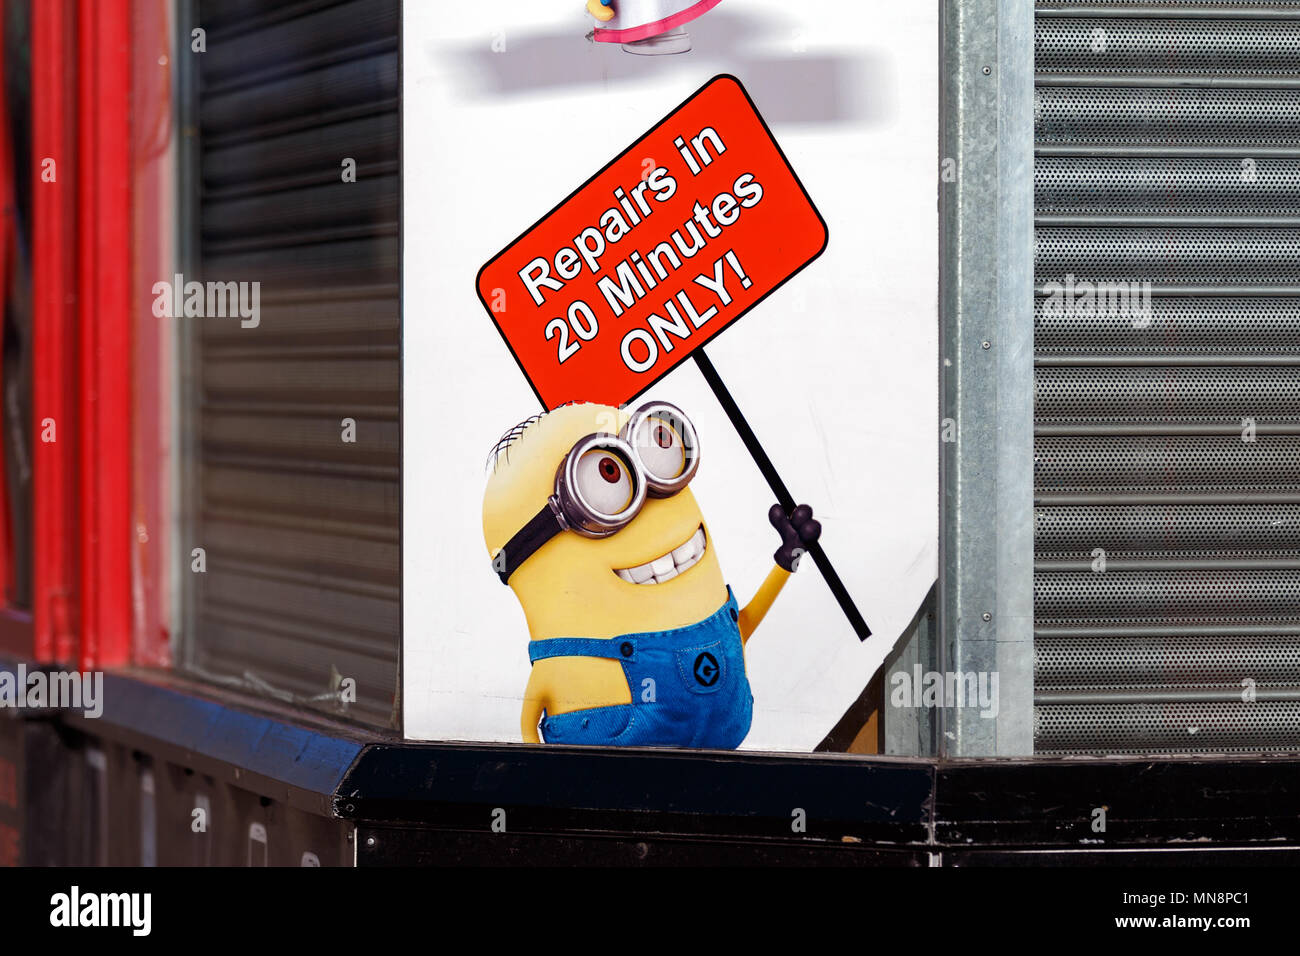 minion holding a sign